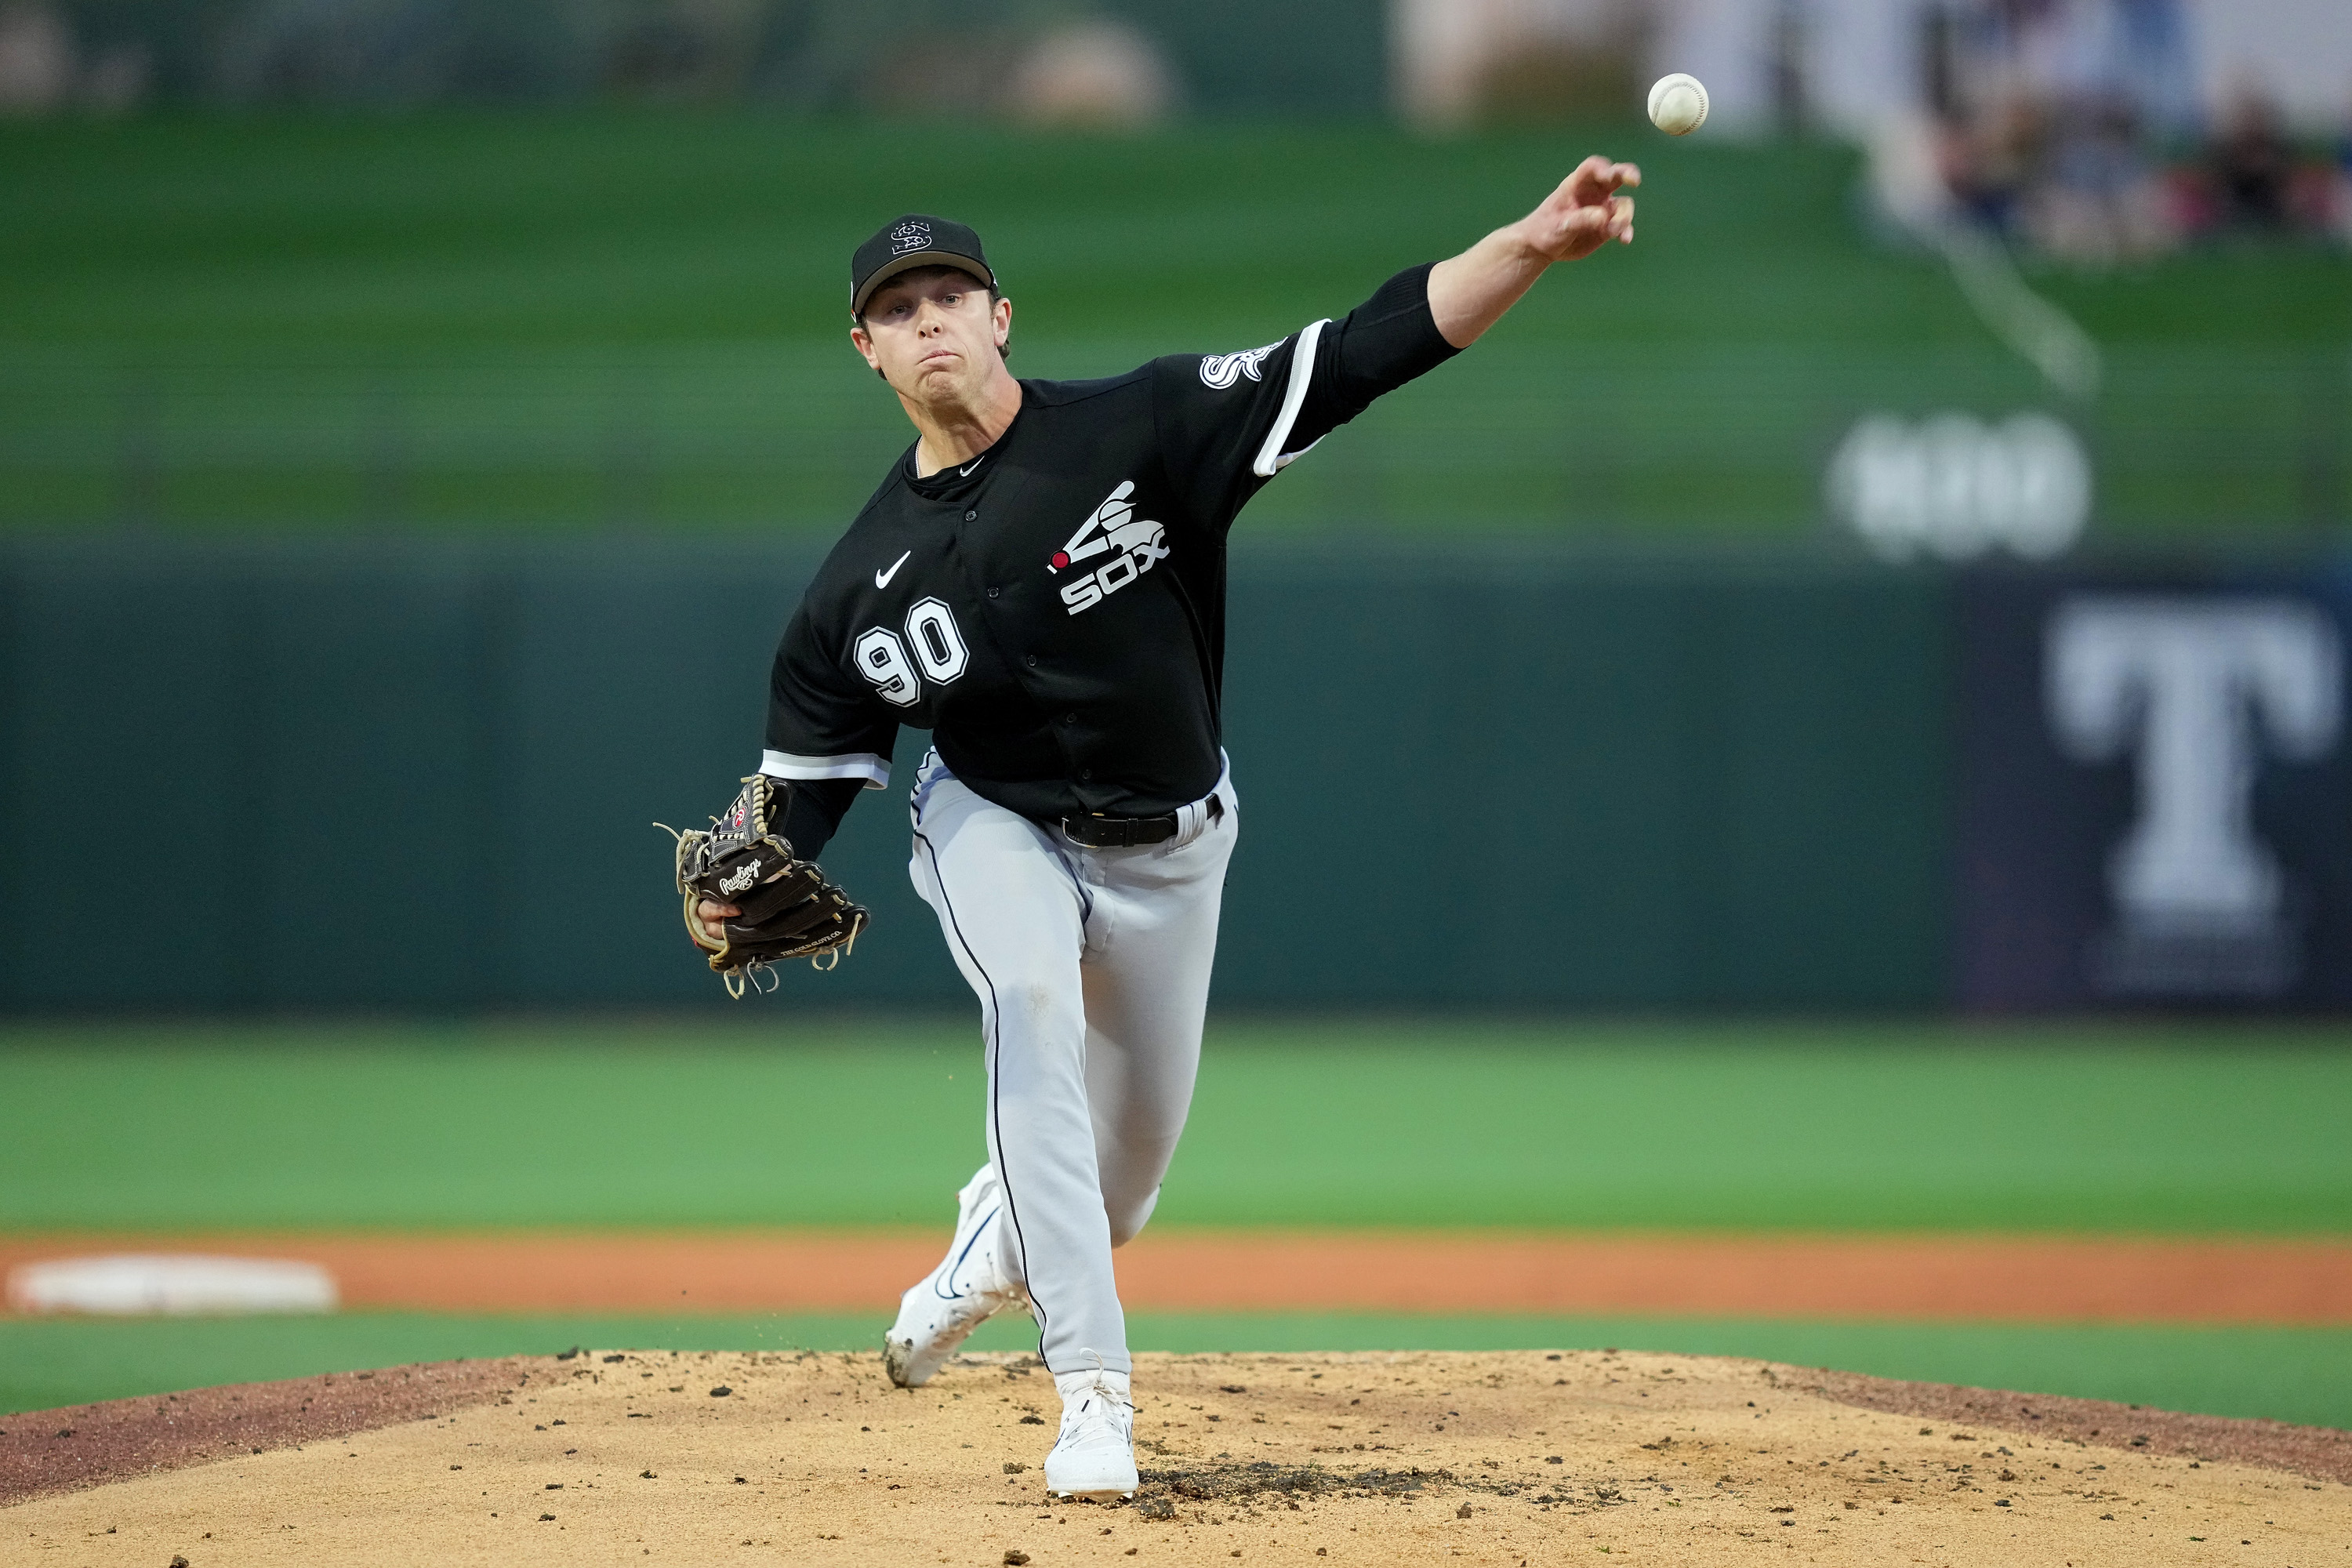 White Sox reliever Declan Cronin working side job at Tread Athletics